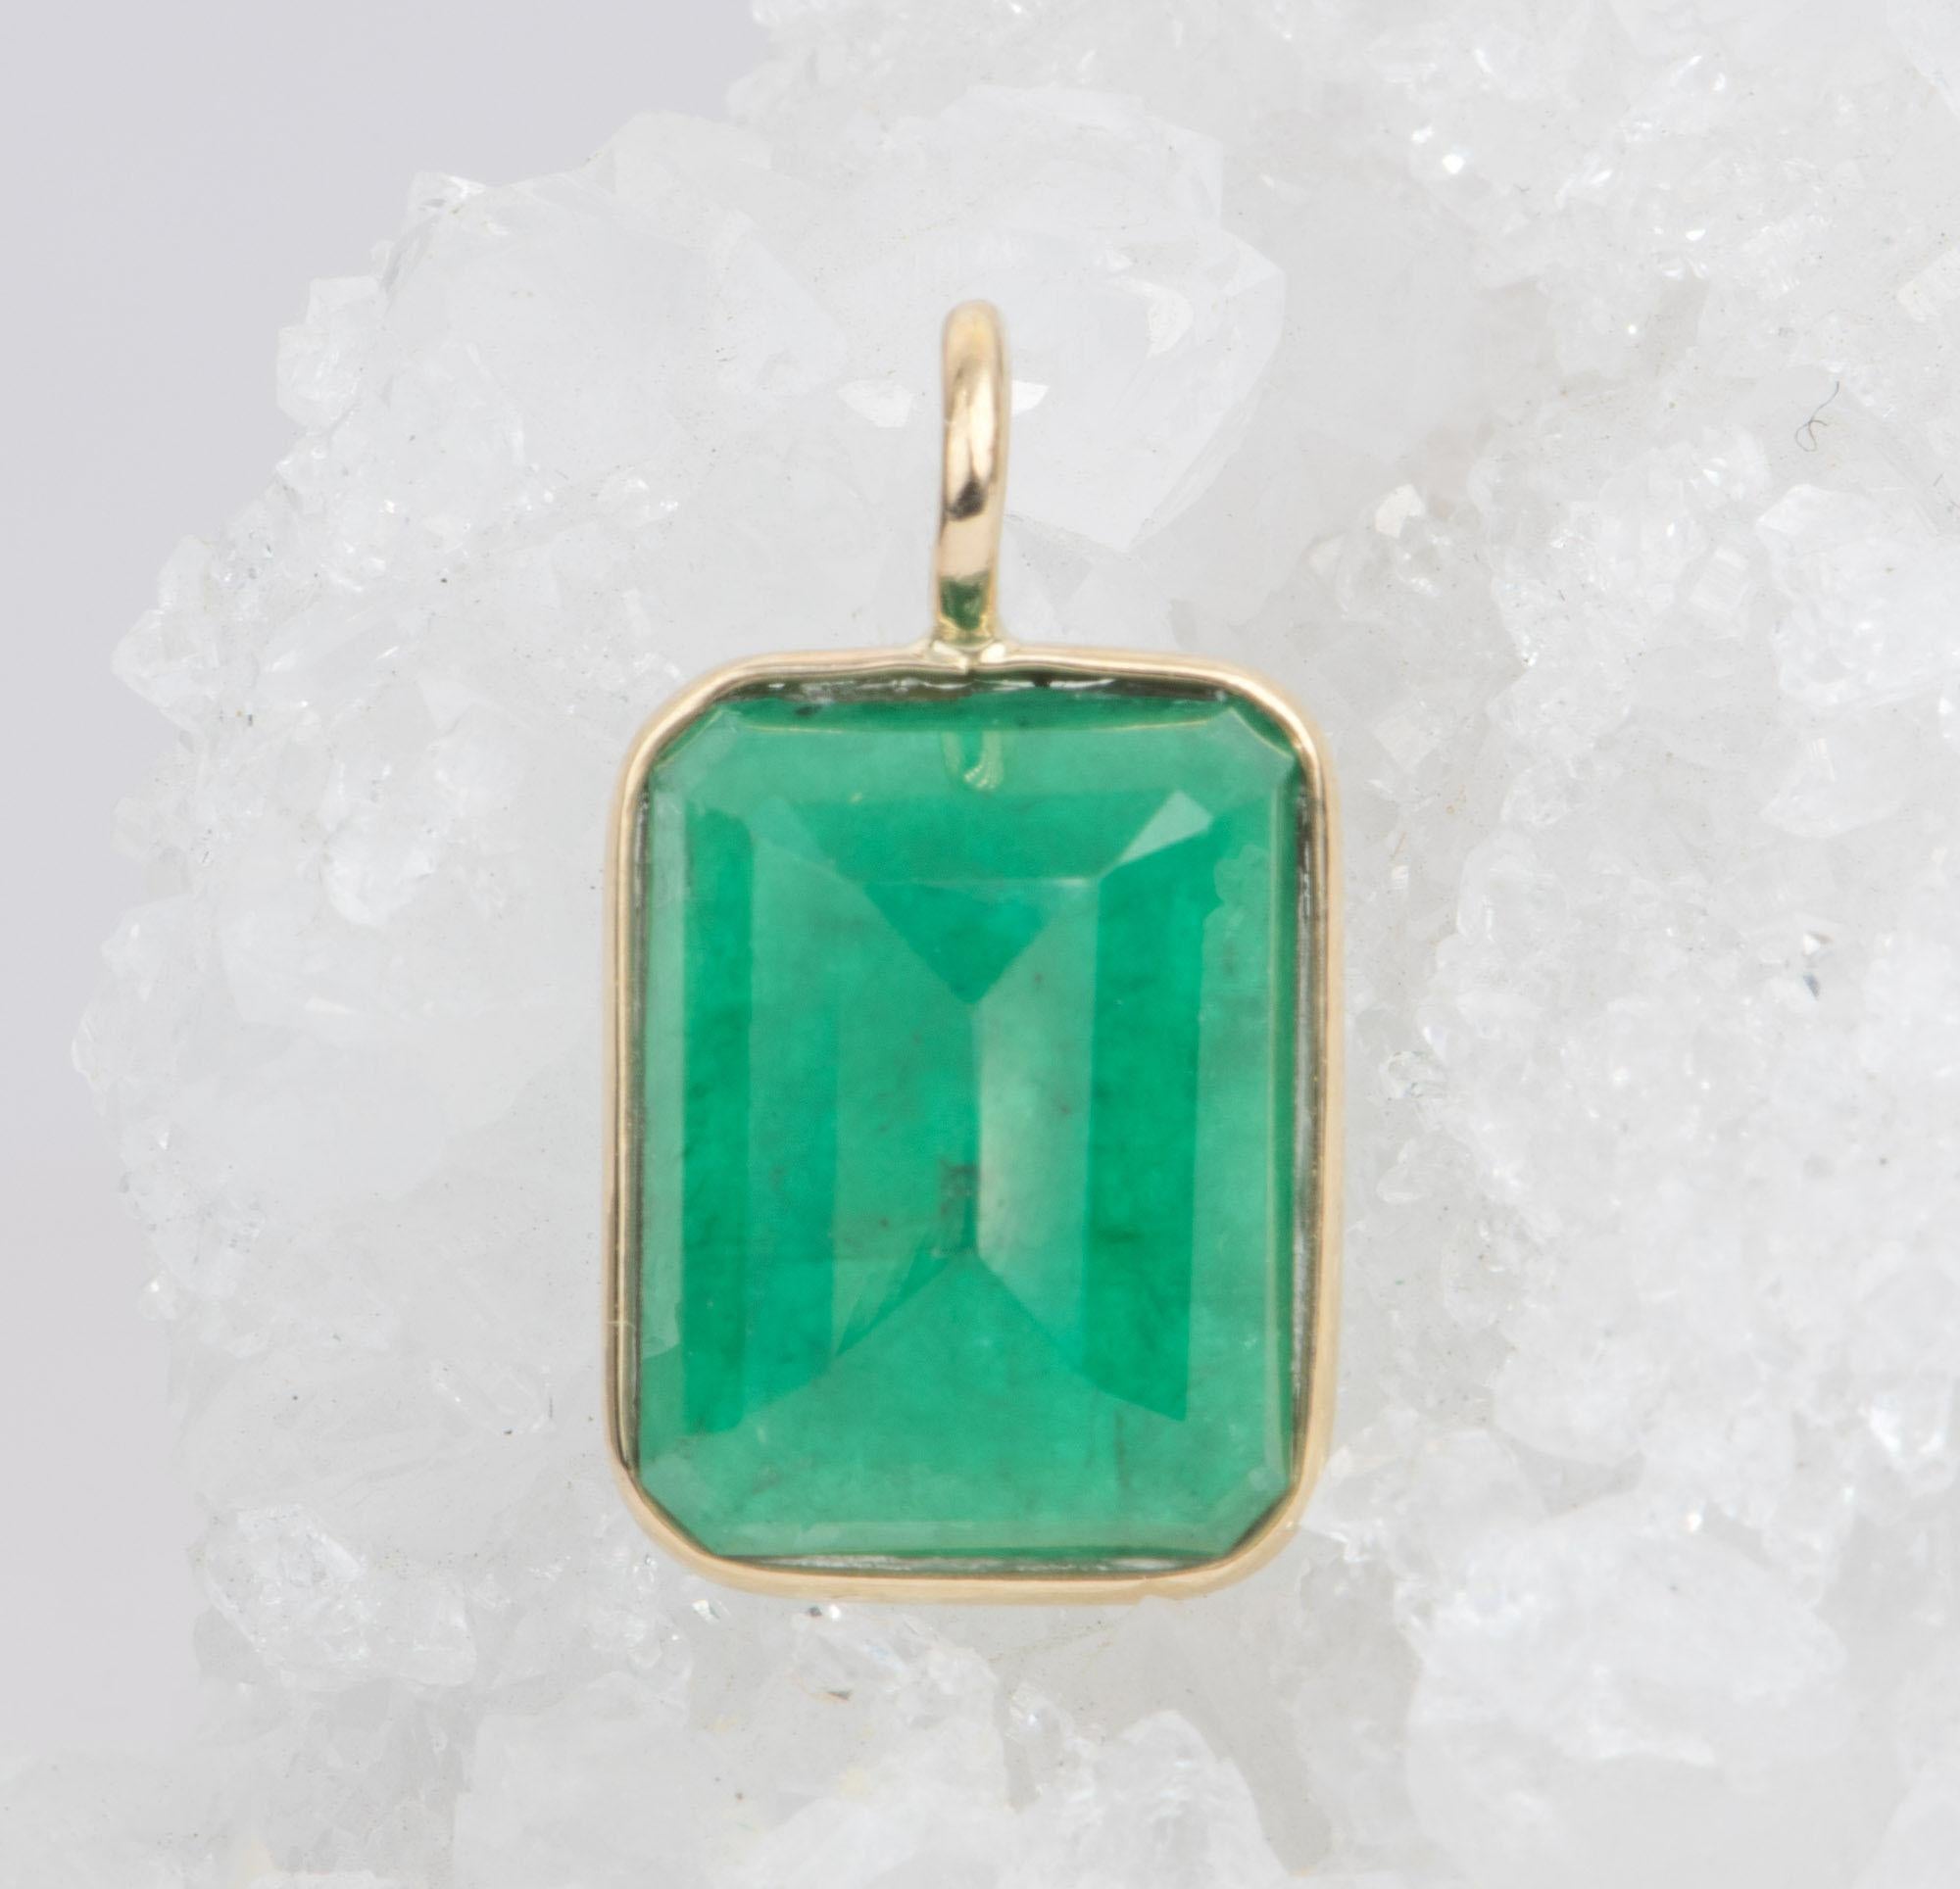 ♥  This faceted emerald is set in a simple gold bezel and gold bail. 
♥  This listing is for the pendant ONLY

♥ Material: 14K yellow gold
♥ Gemstone: Emerald, 5.6ct
♥  Measurements: The overall setting measures 9.7mm in width, 14.0mm in length, and